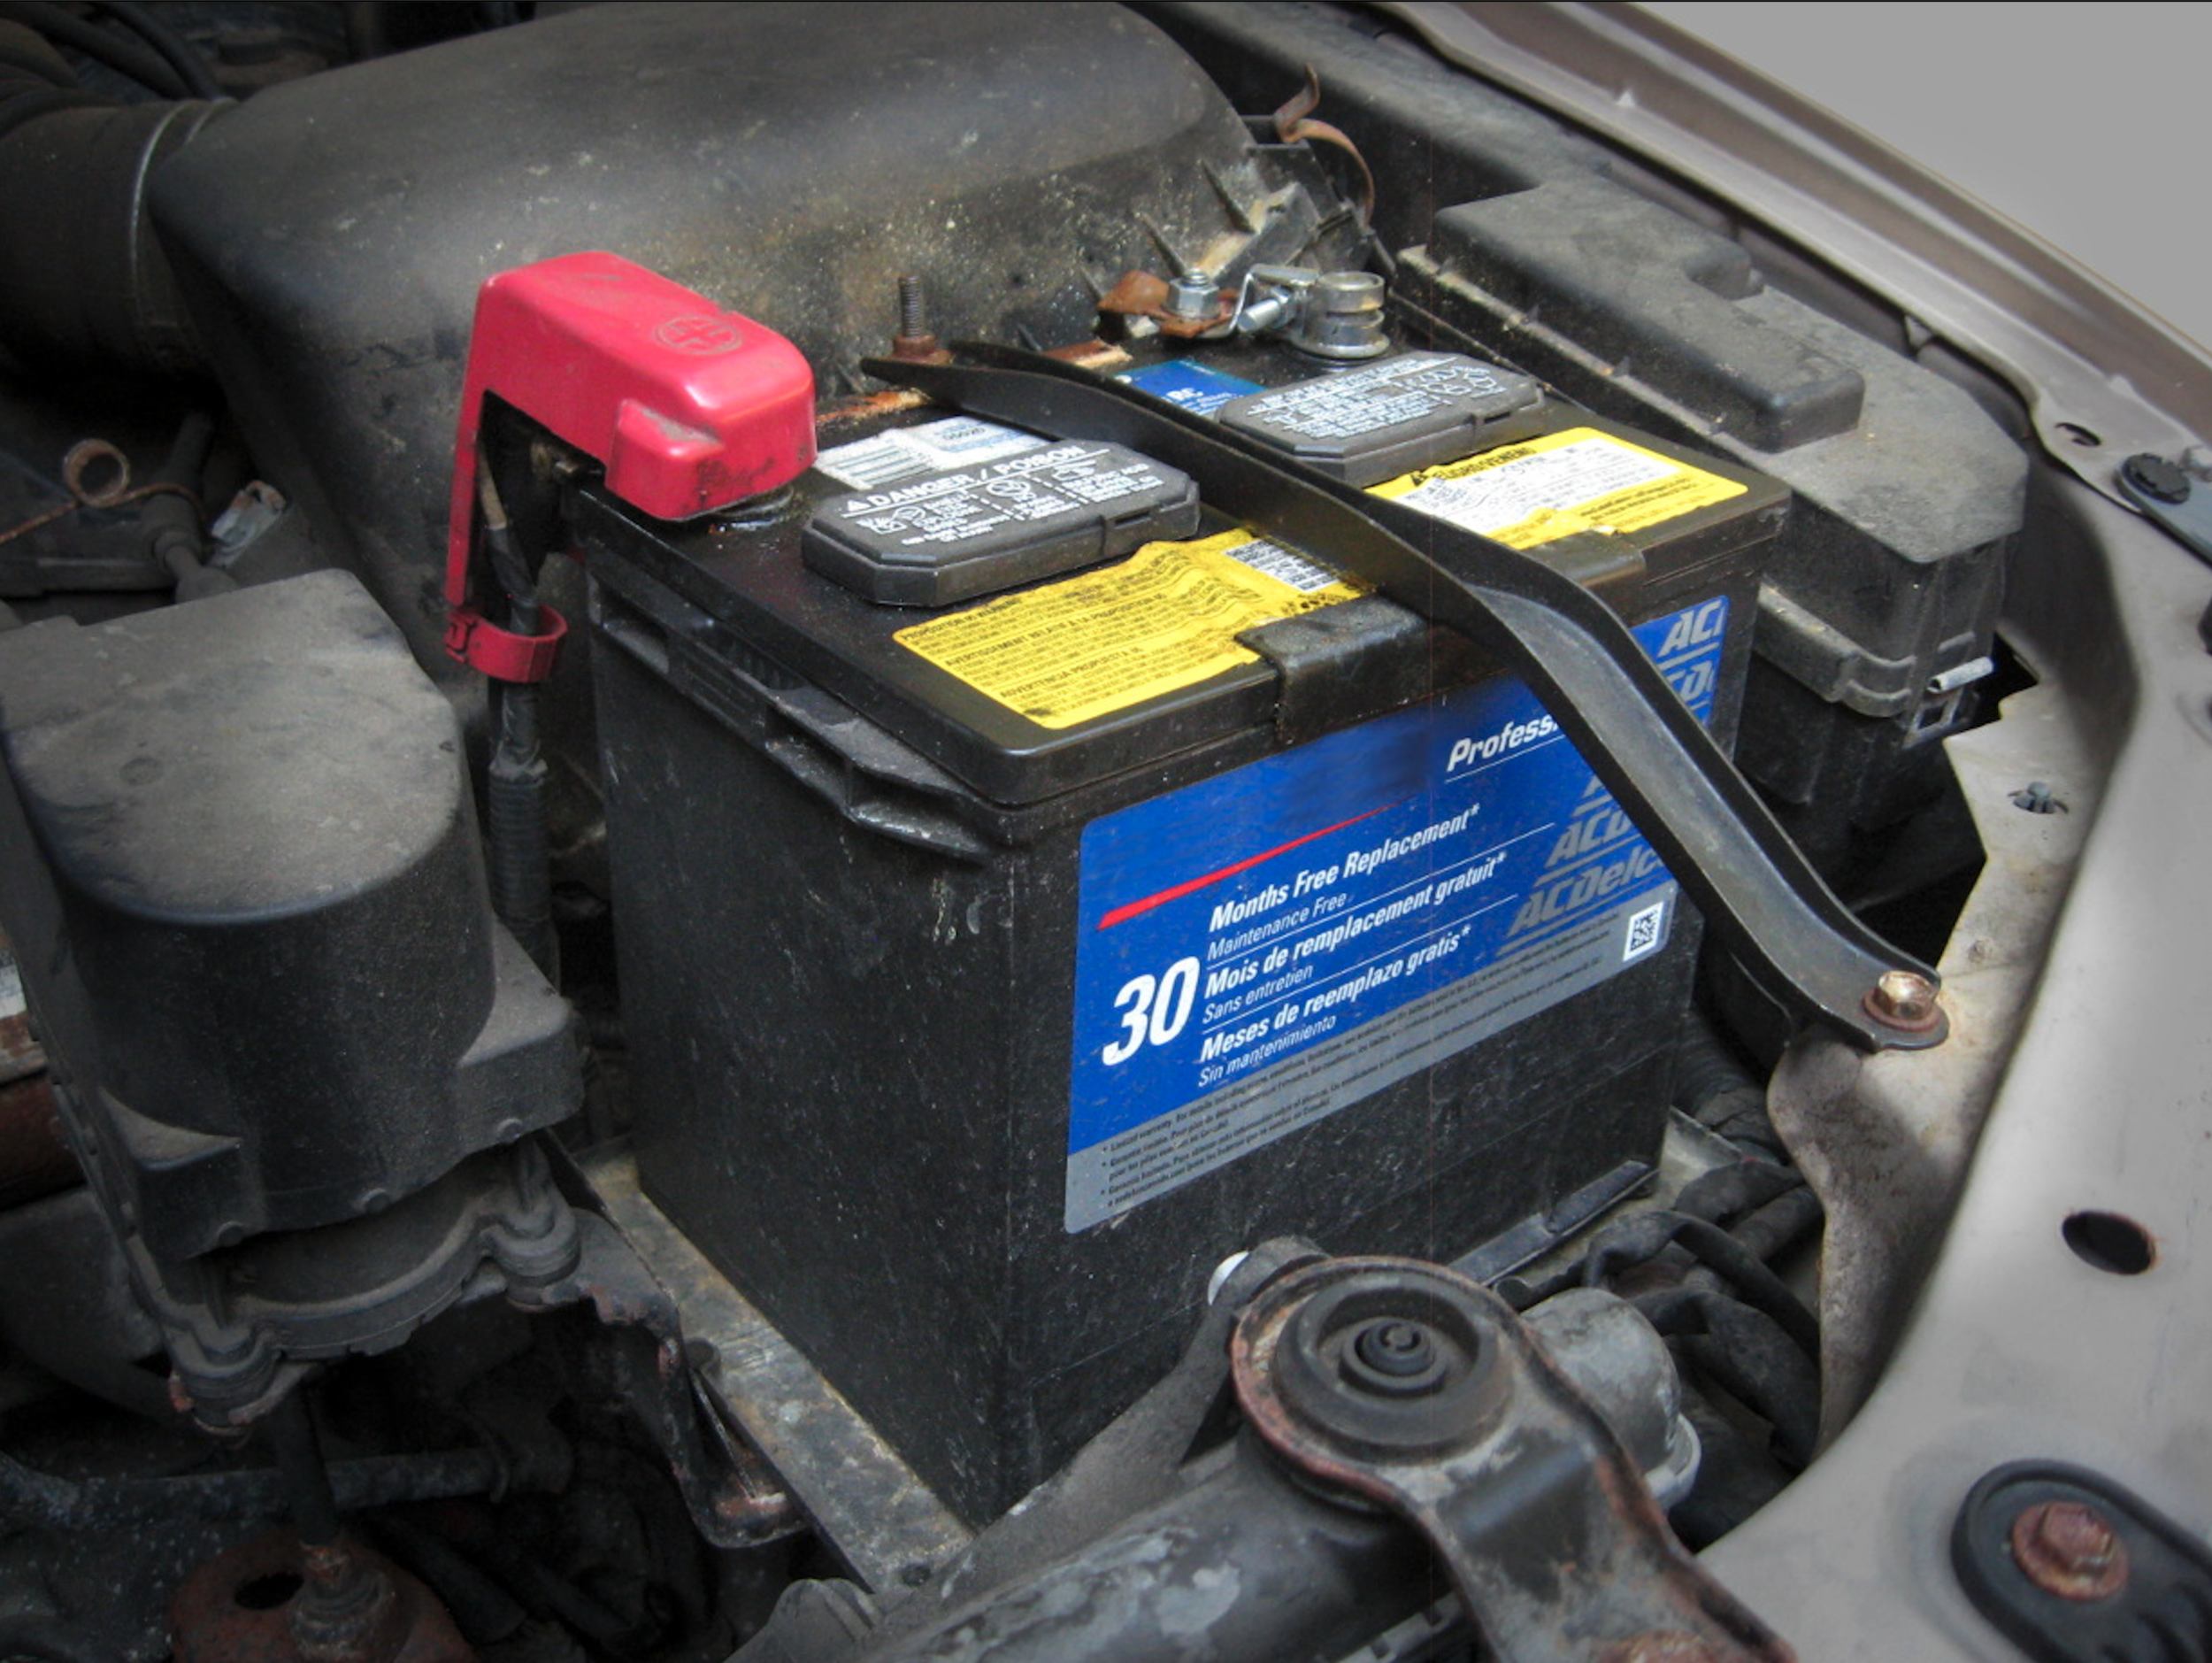 Car Battery Change, Car Battery Replacement